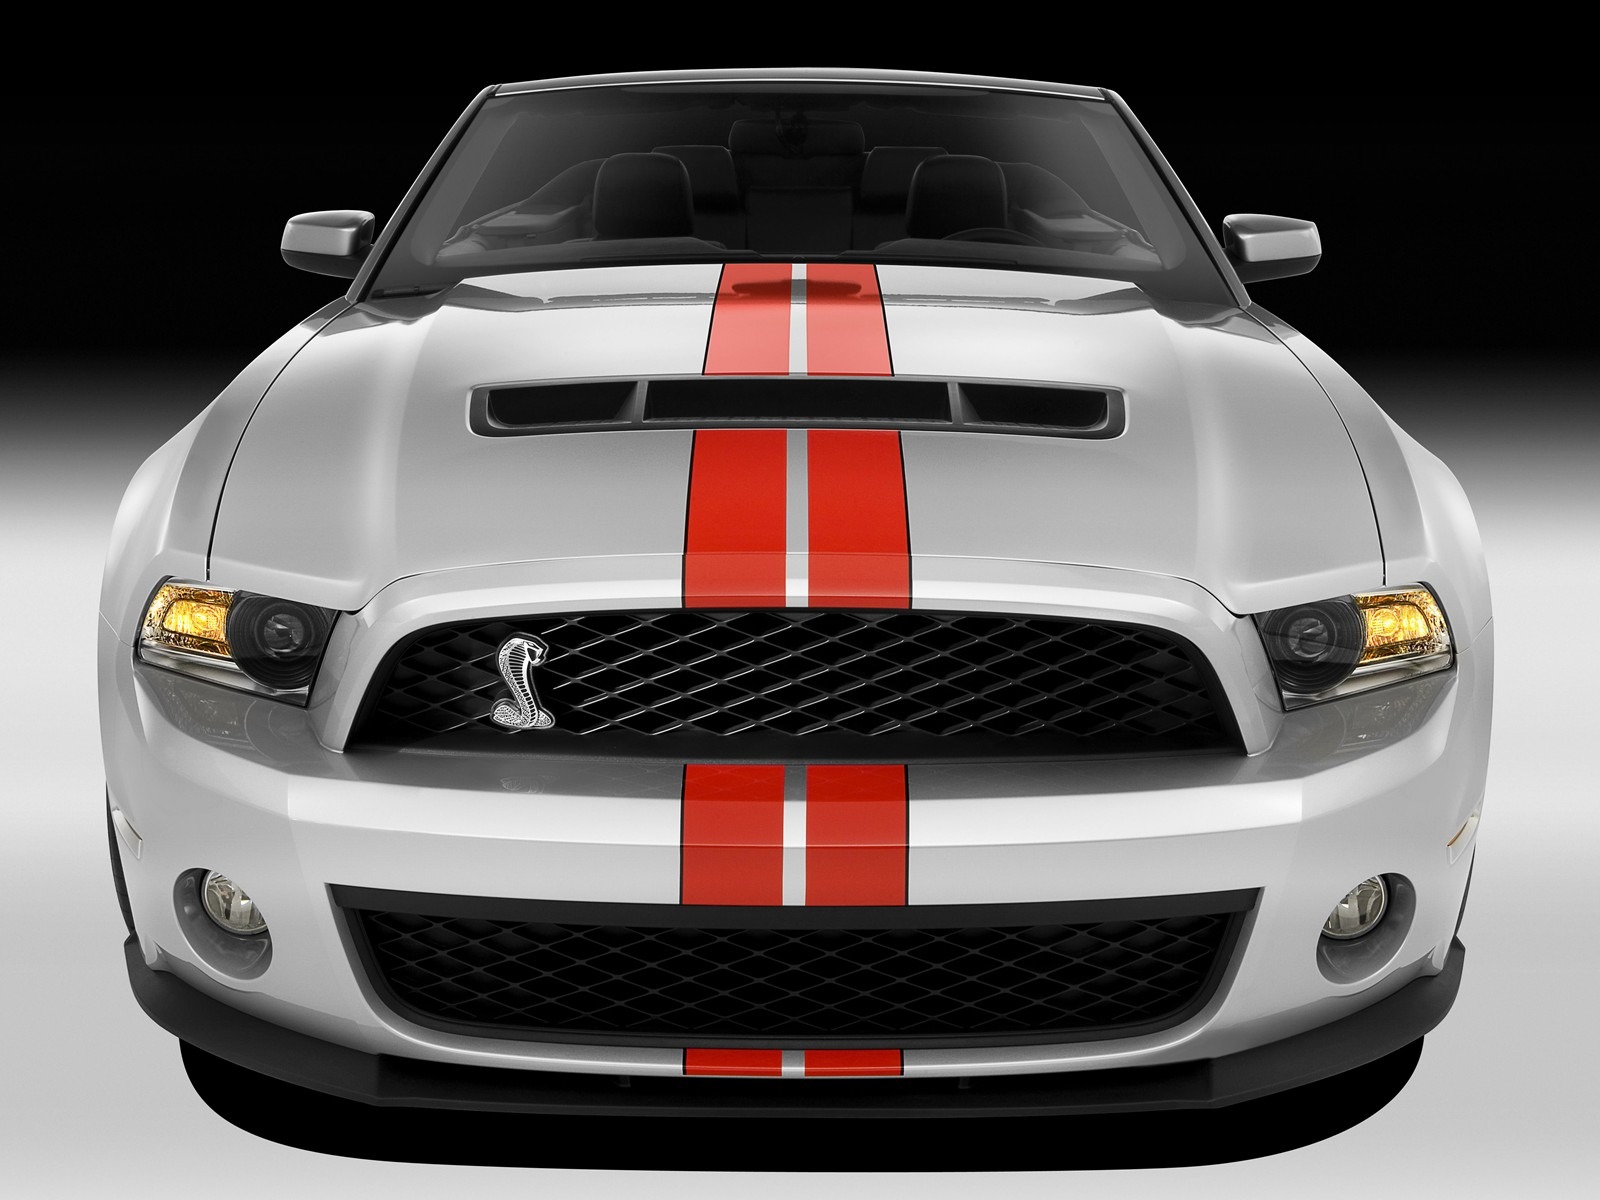 Ford Mustang GT500 Wallpapers #3 - 1600x1200